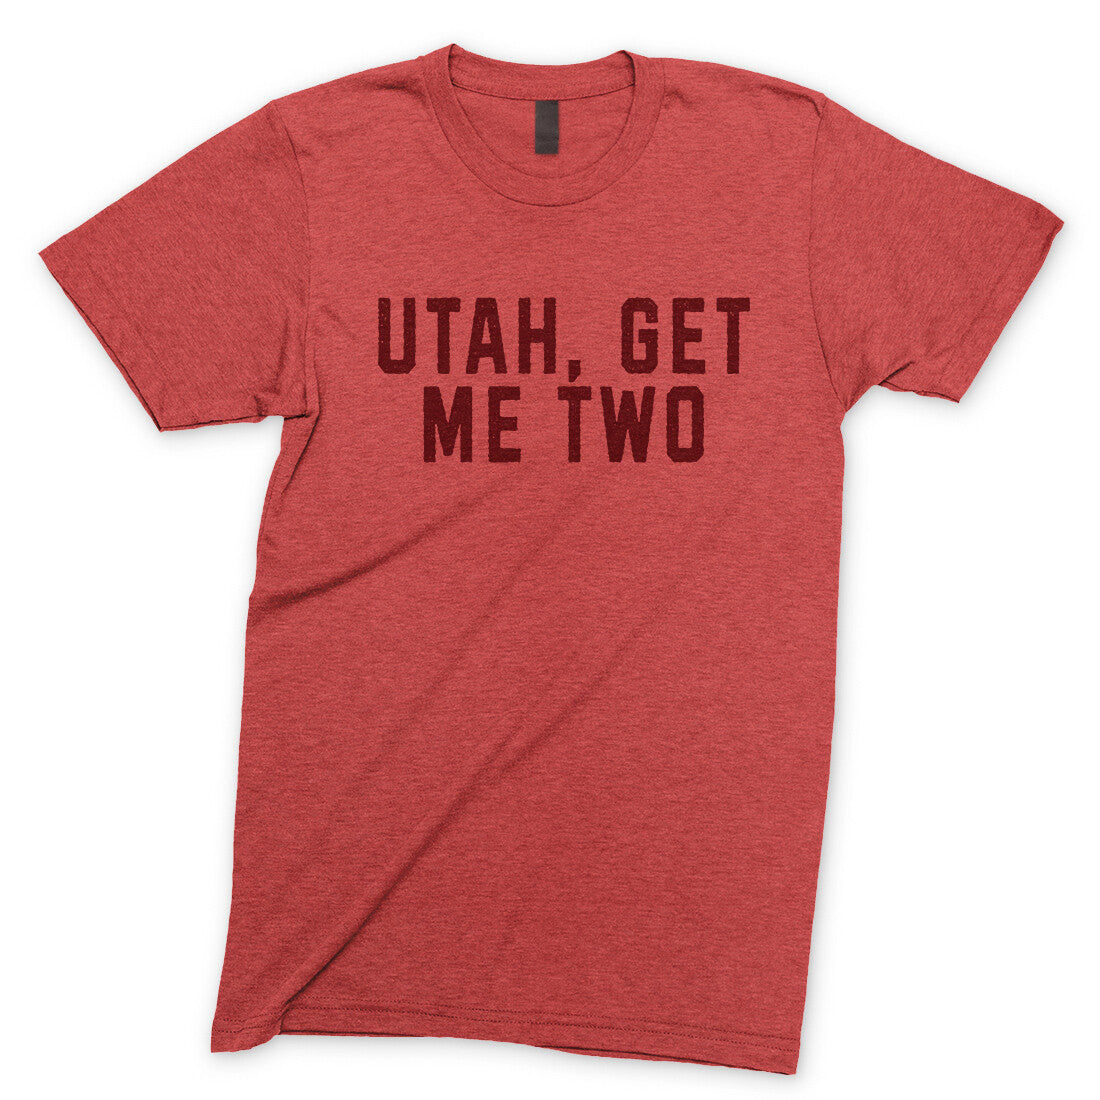 Utah Get me Two in Heather Red Color